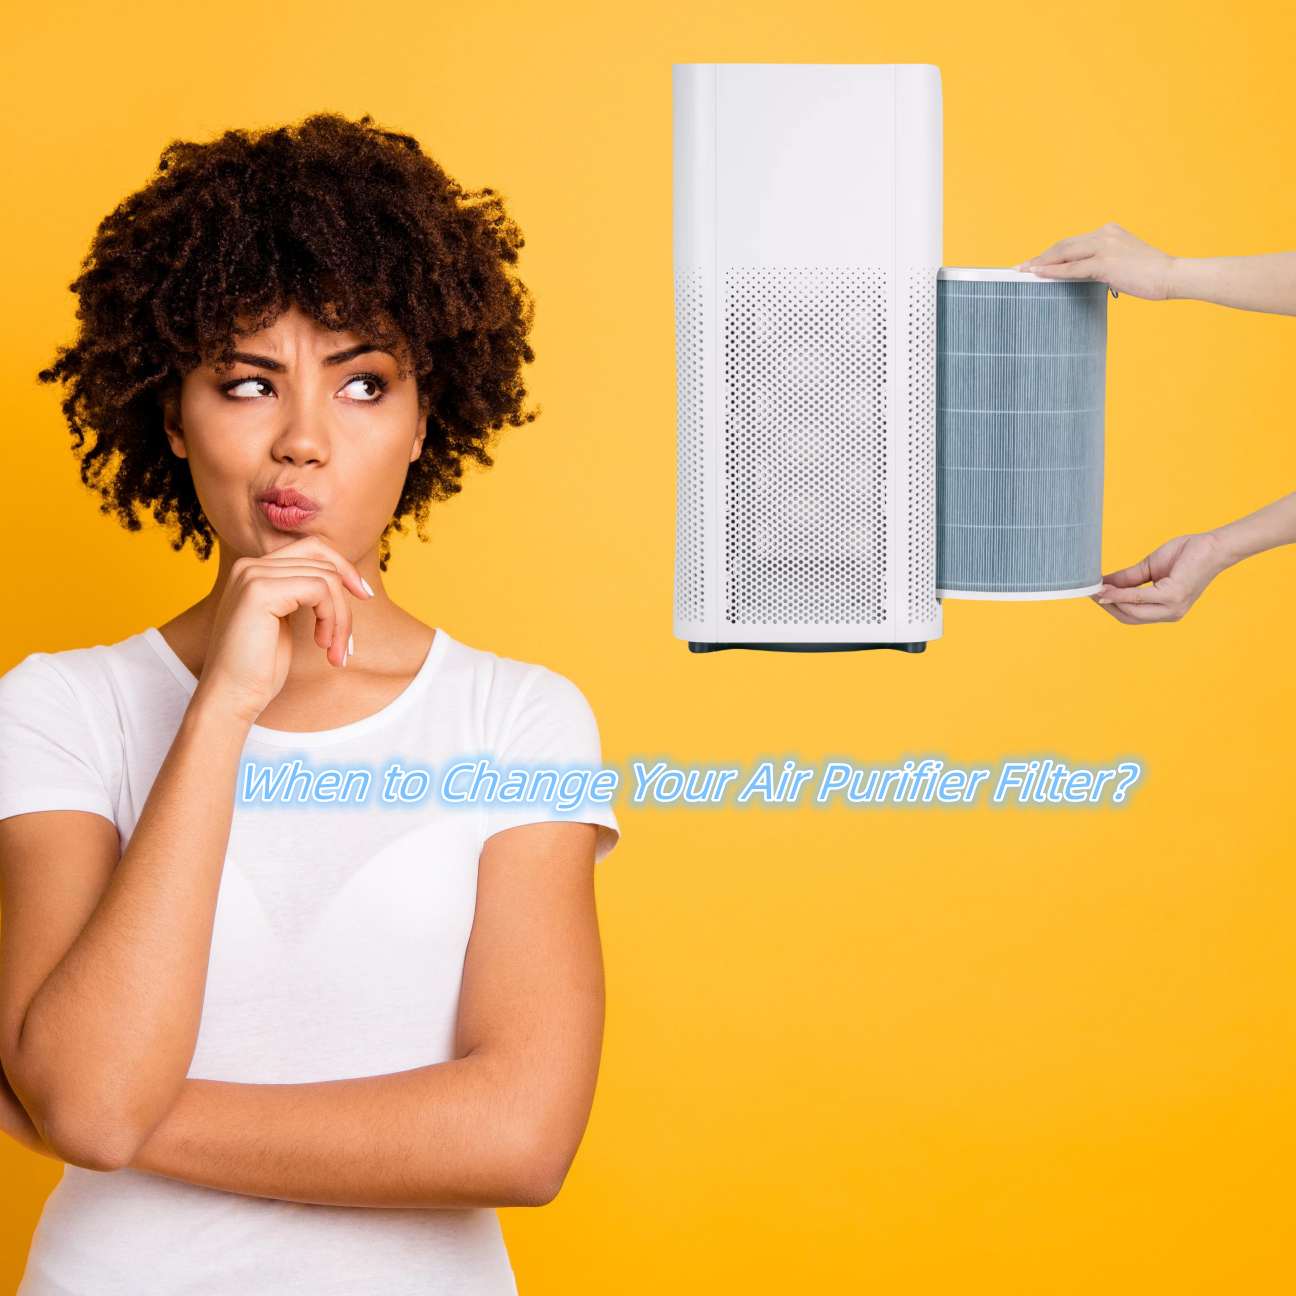 When to Change Your Air Purifier Filter